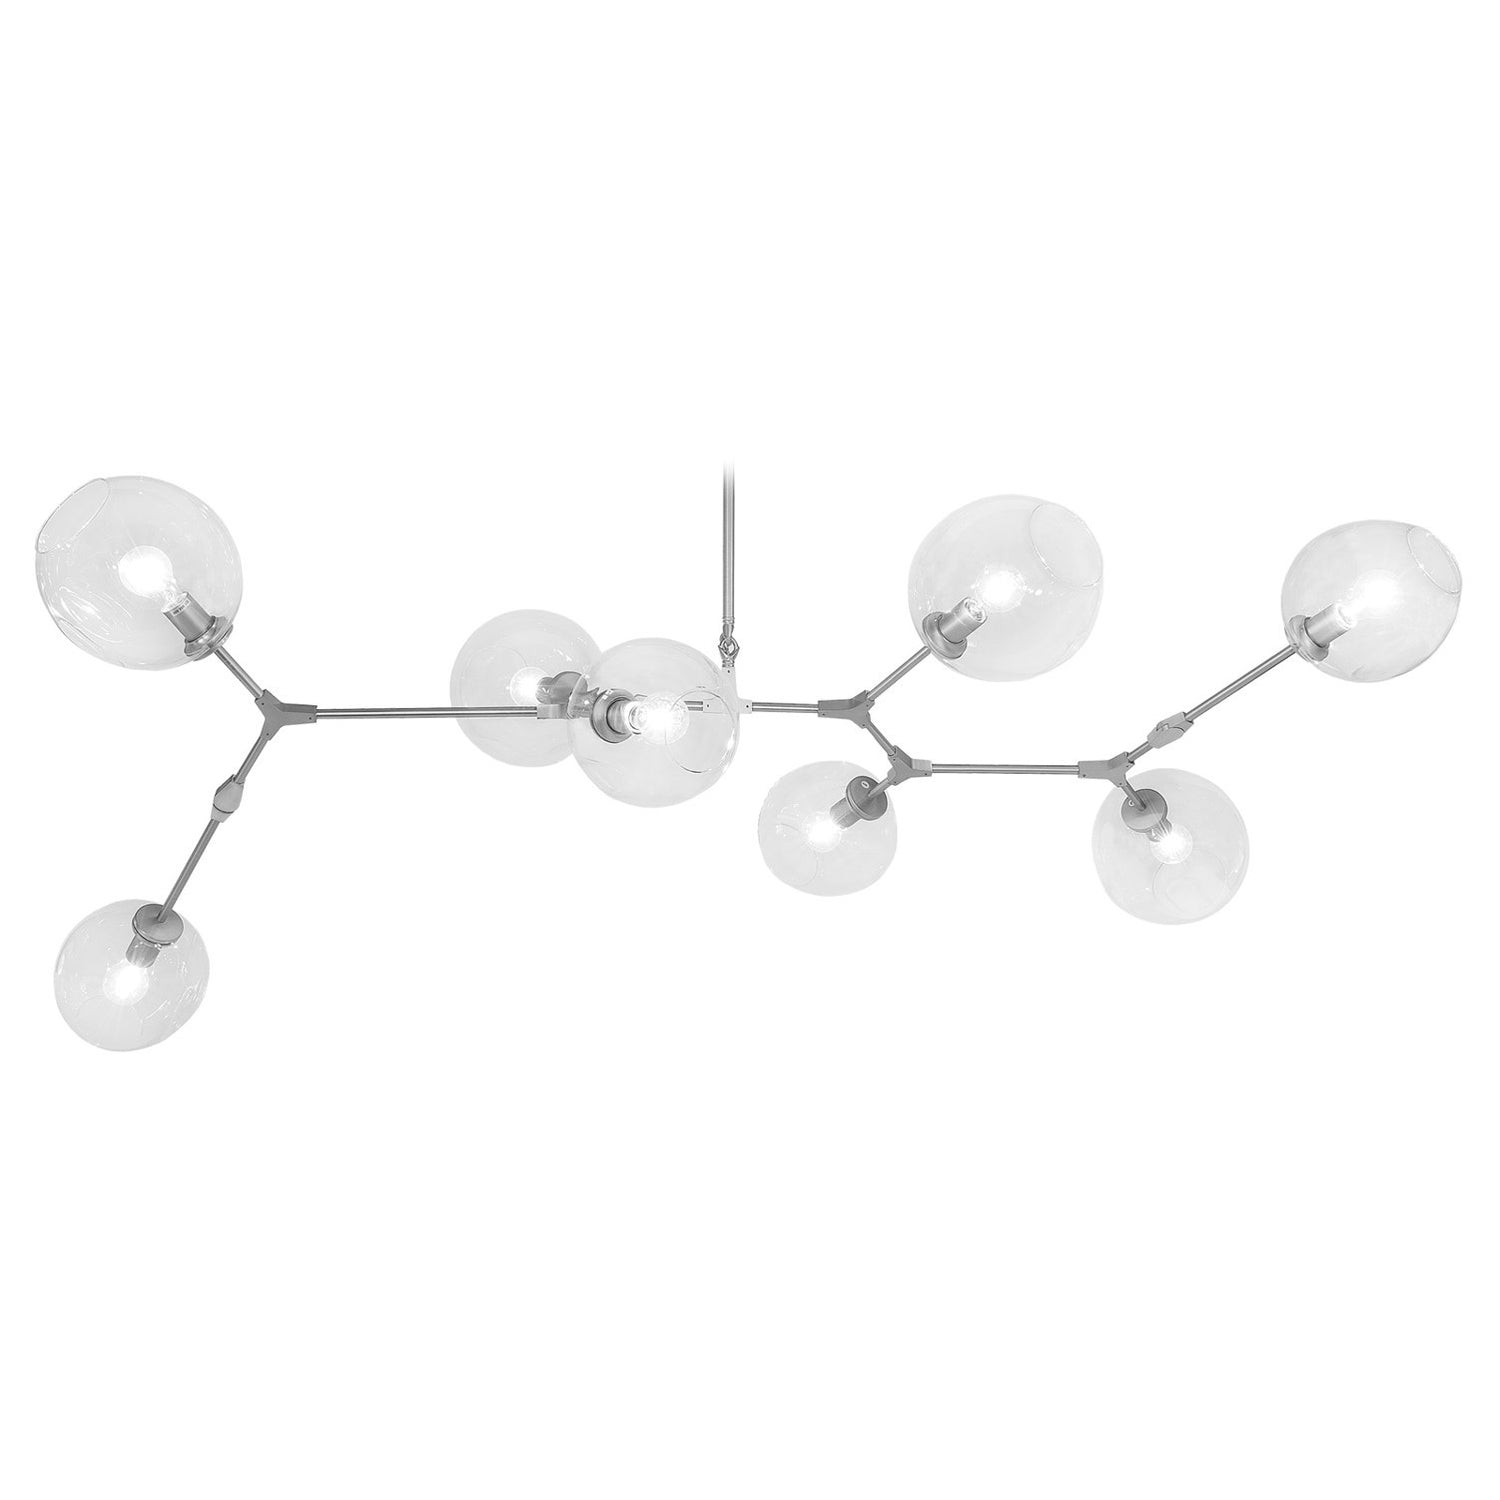 Fairfax Chrome Large Mid-Century Modern Linear Chandelier with Clear Glass Globes by Avenue Lighting HF8088-CH